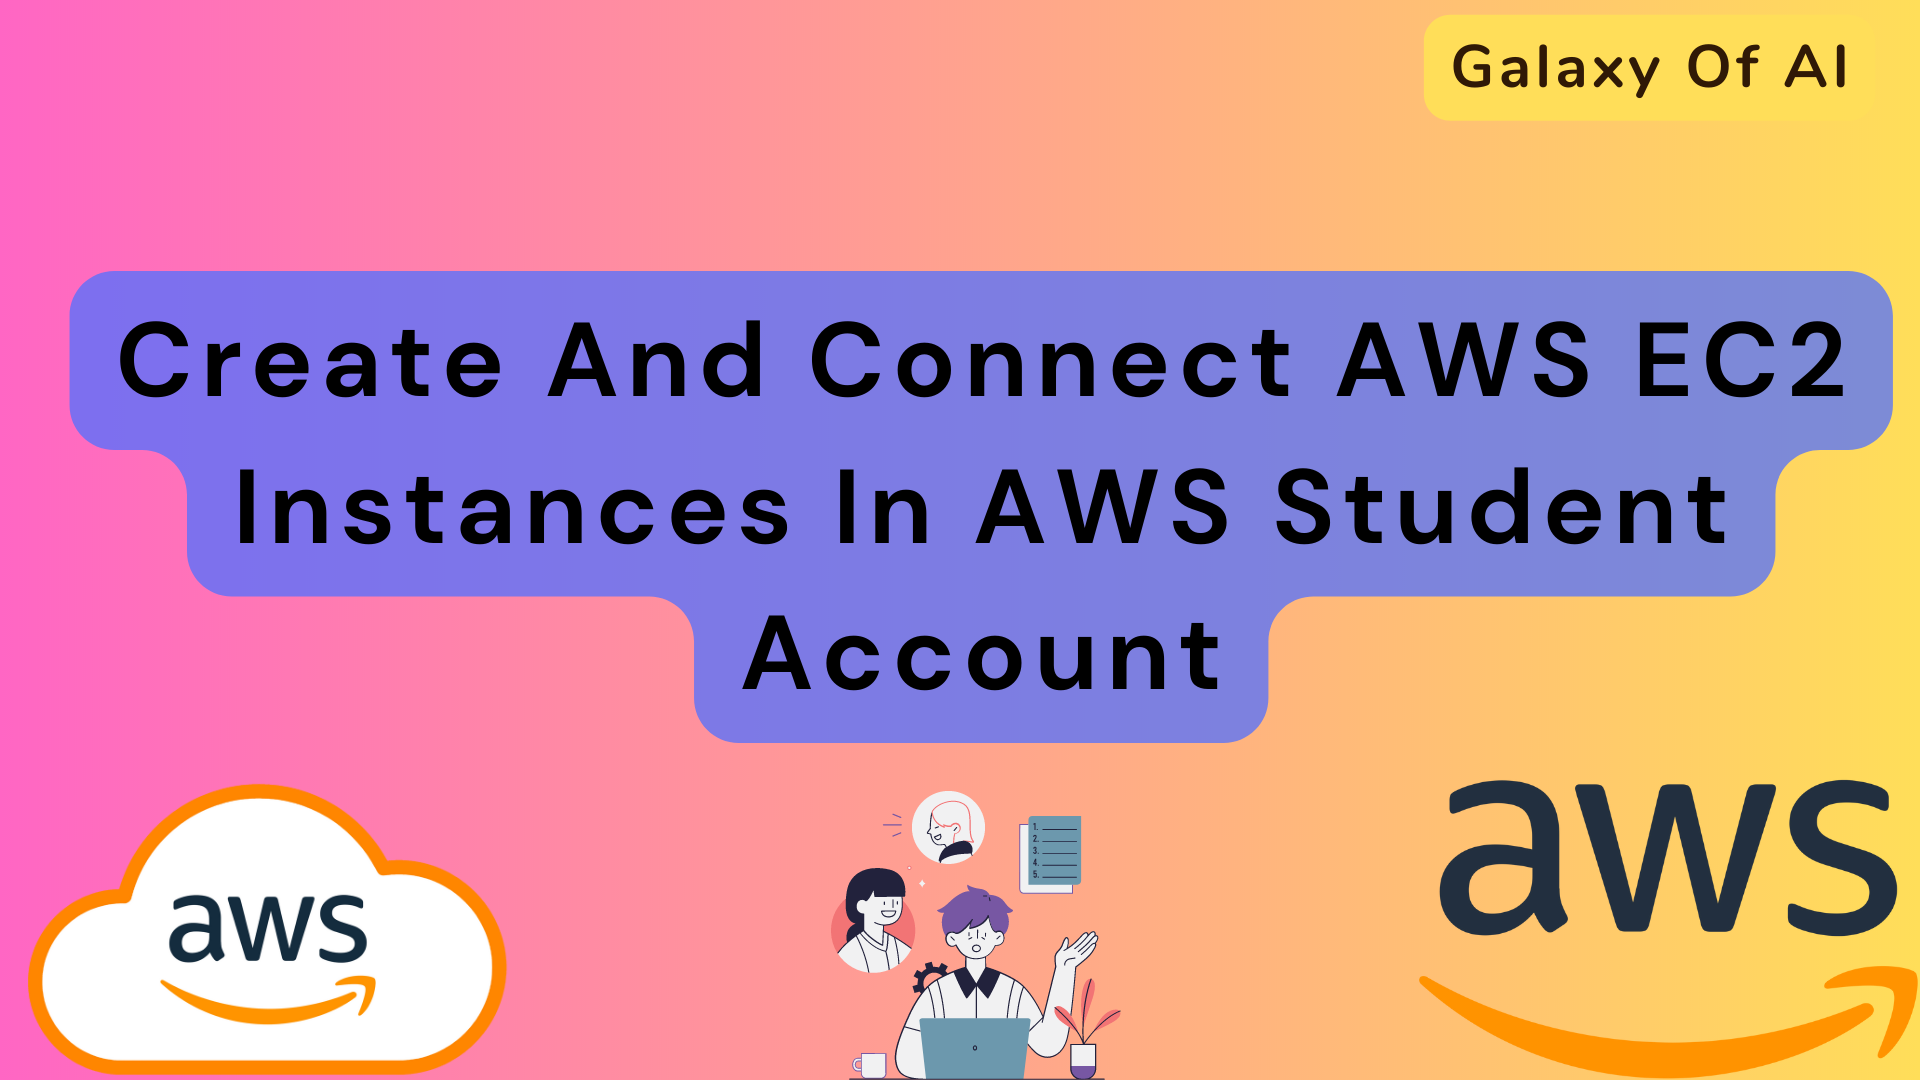 Create And Connect AWS EC2 Instances In AWS Student Account